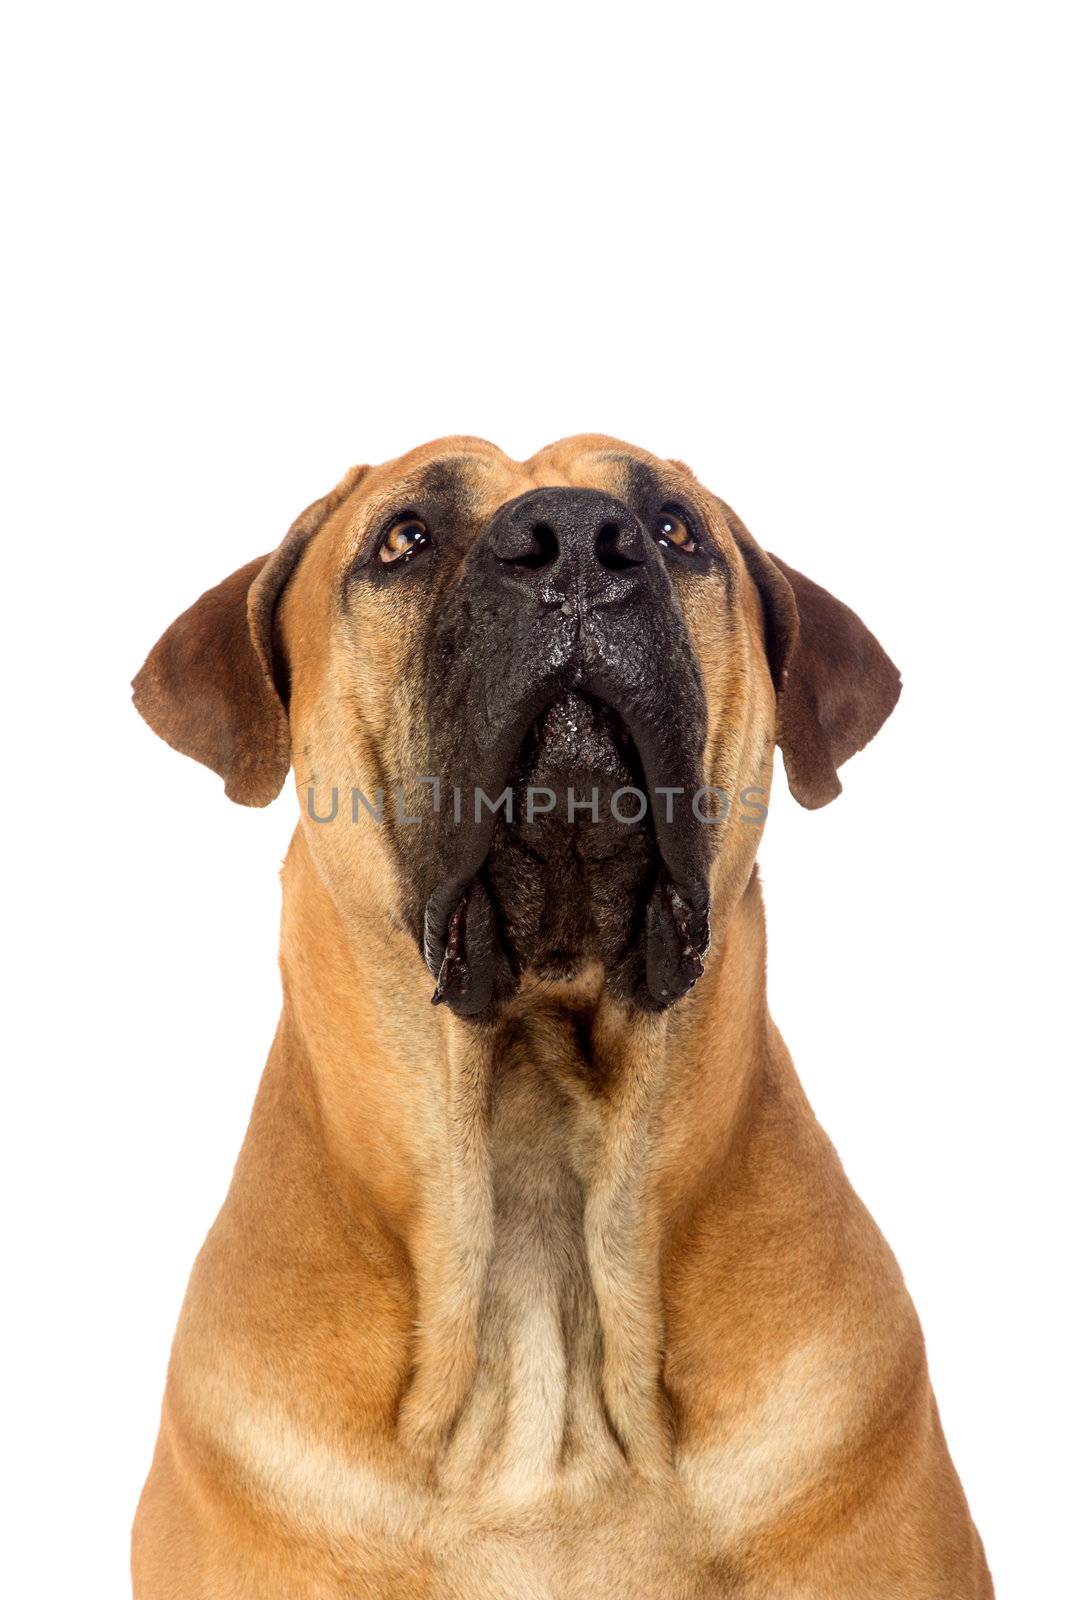 South african mastiff, isolated on white